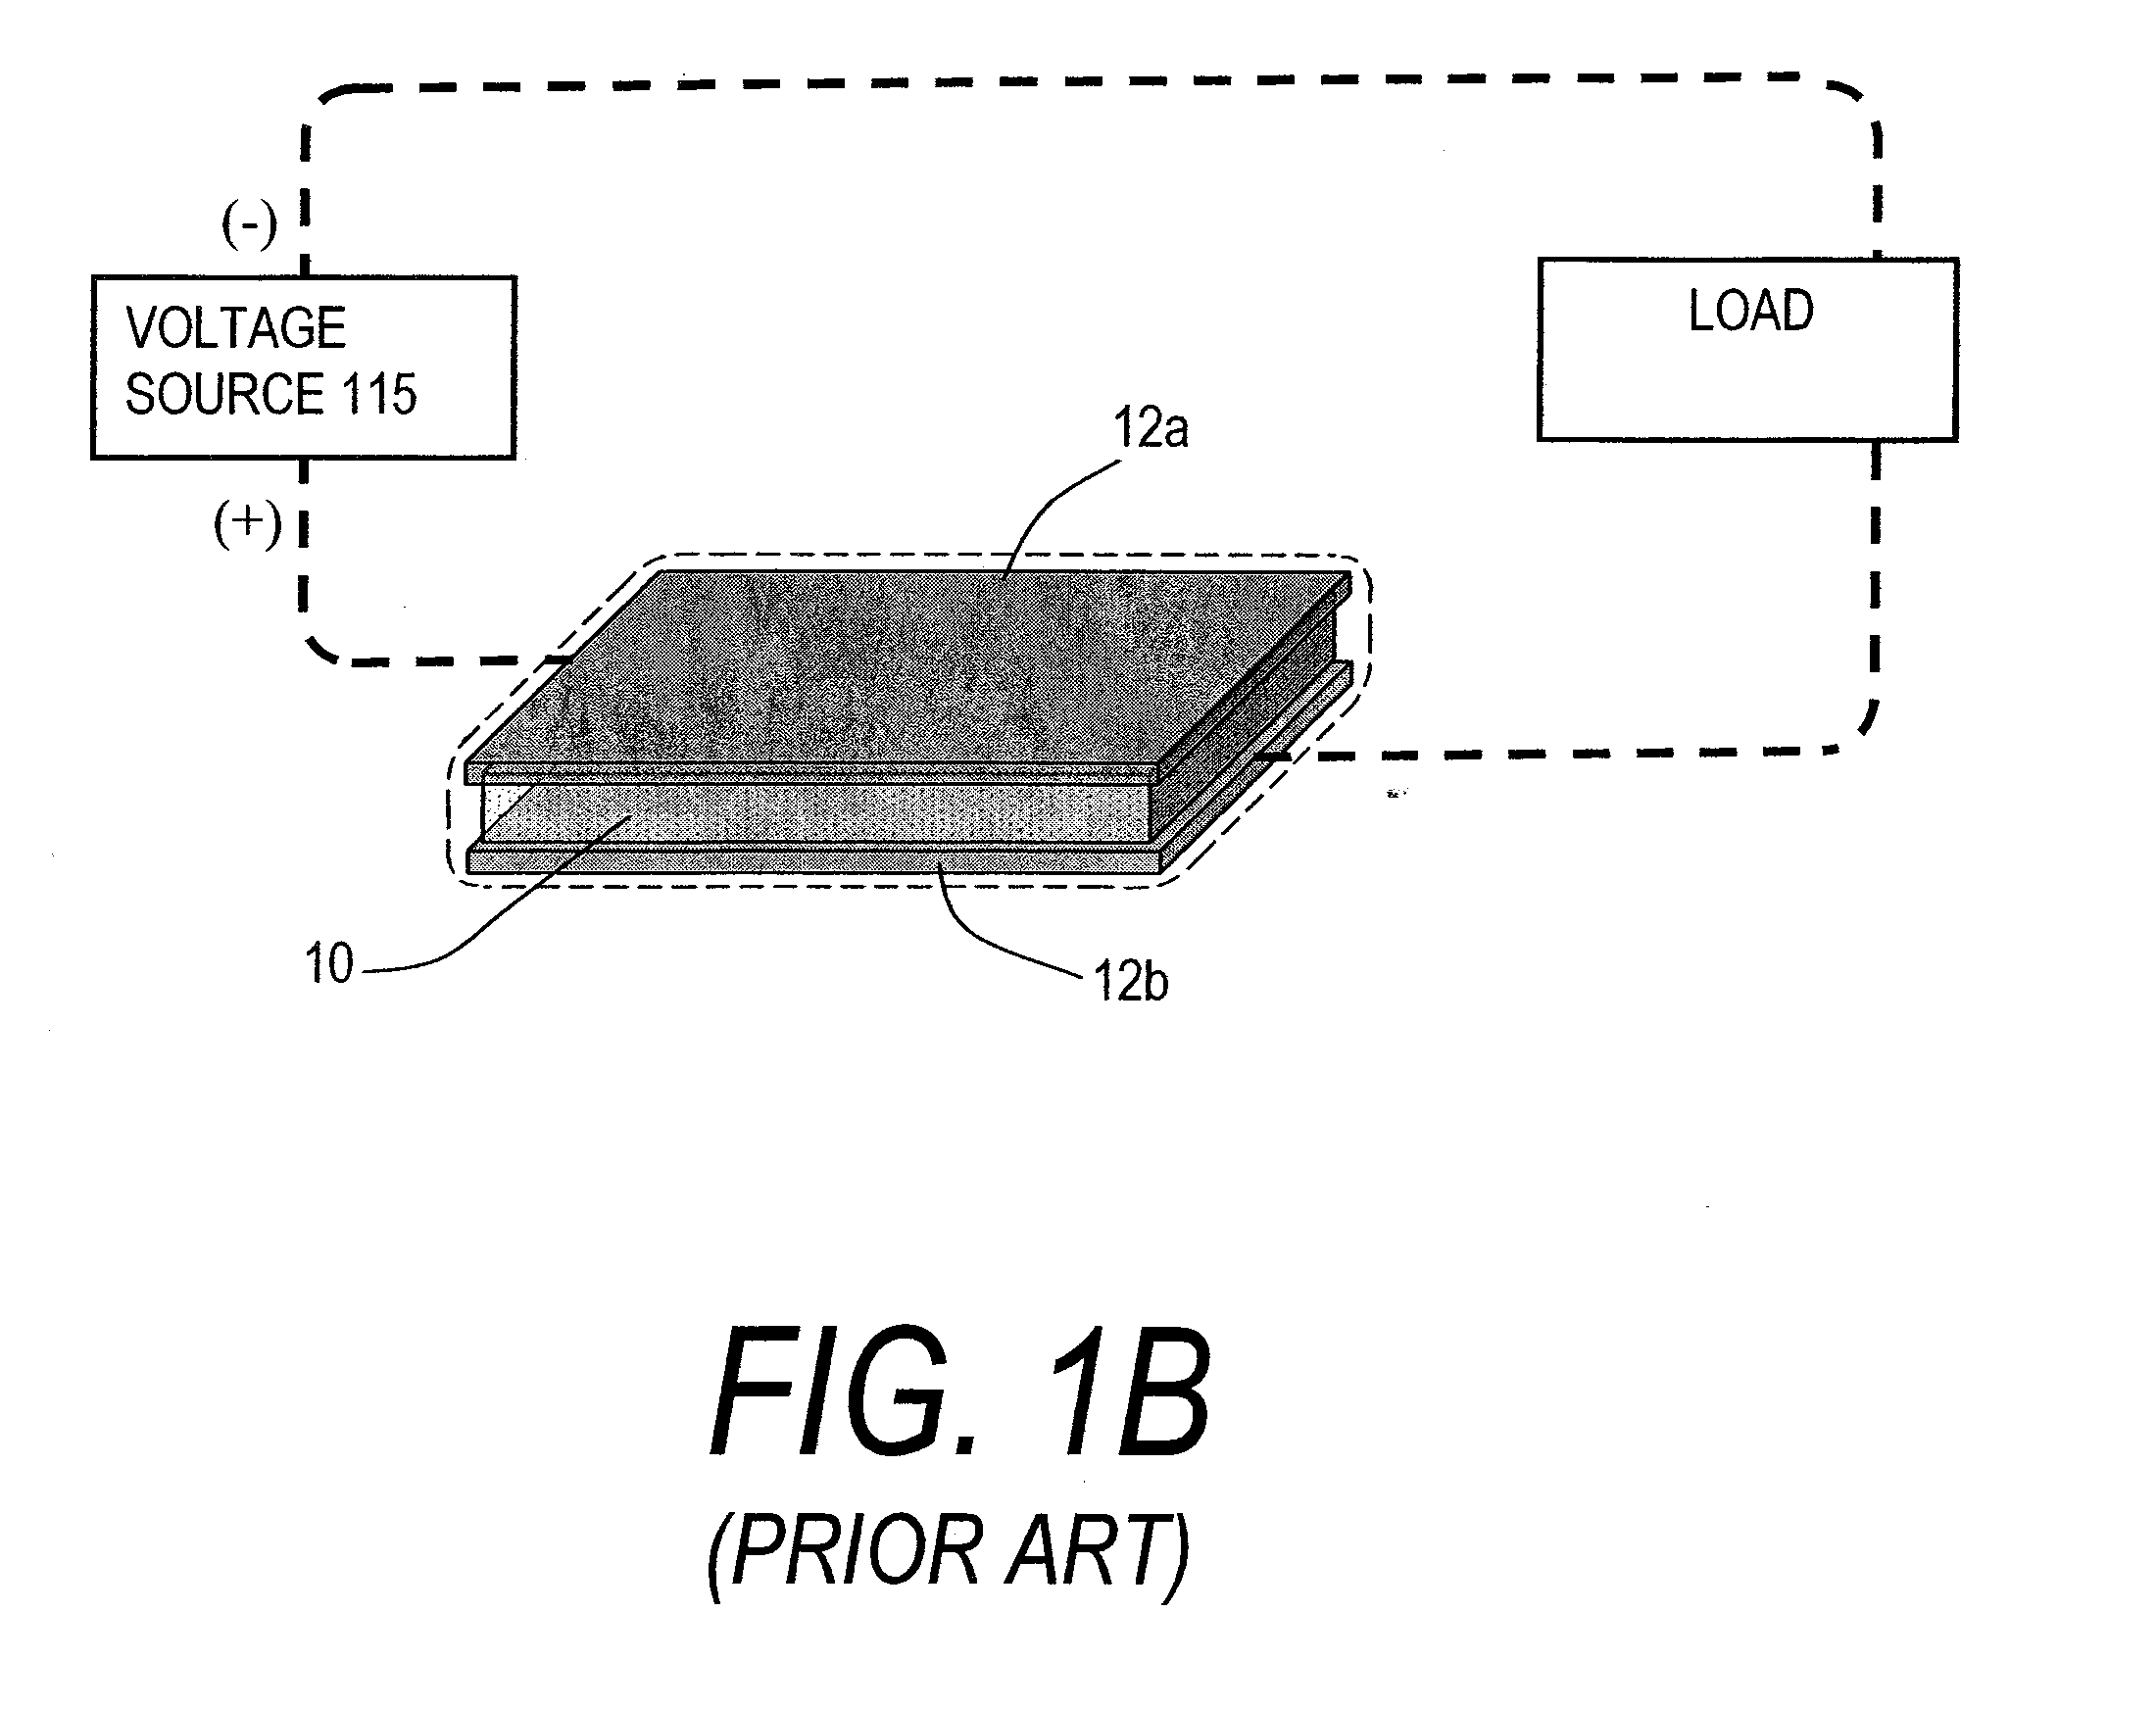 Surgical sealing surfaces and methods of use